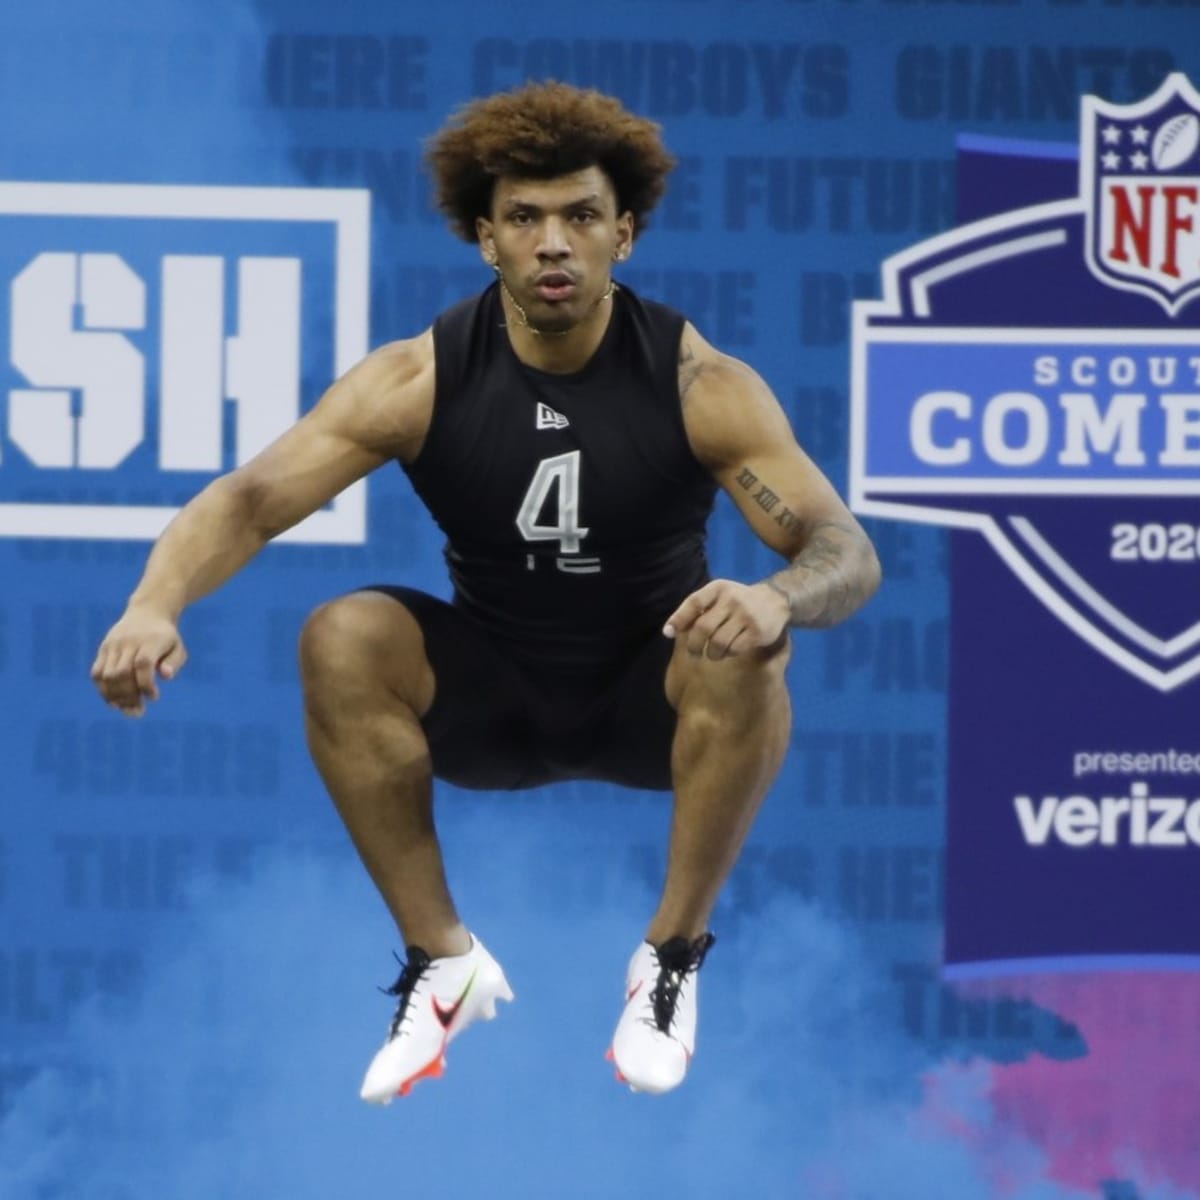 Hunter Bryant was the top-rated UDFA based on consensus draft boards